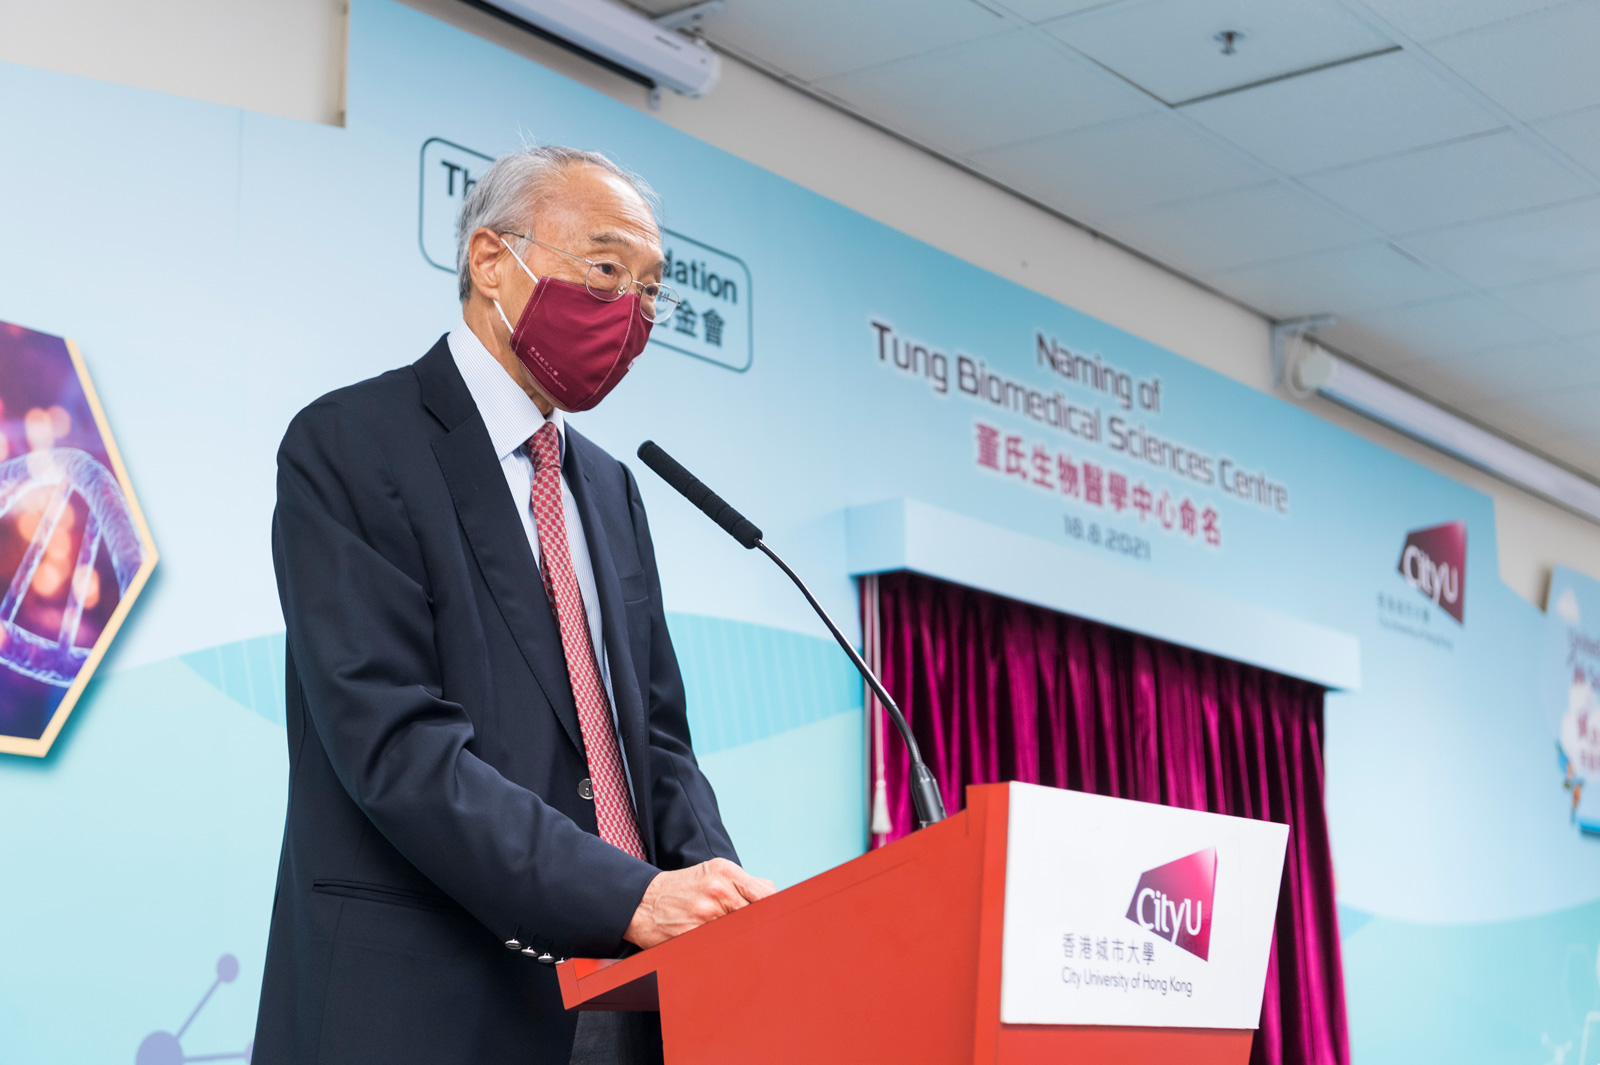 Dr Tung endorses the collaborative approach of the Tung Biomedical Sciences Centre.